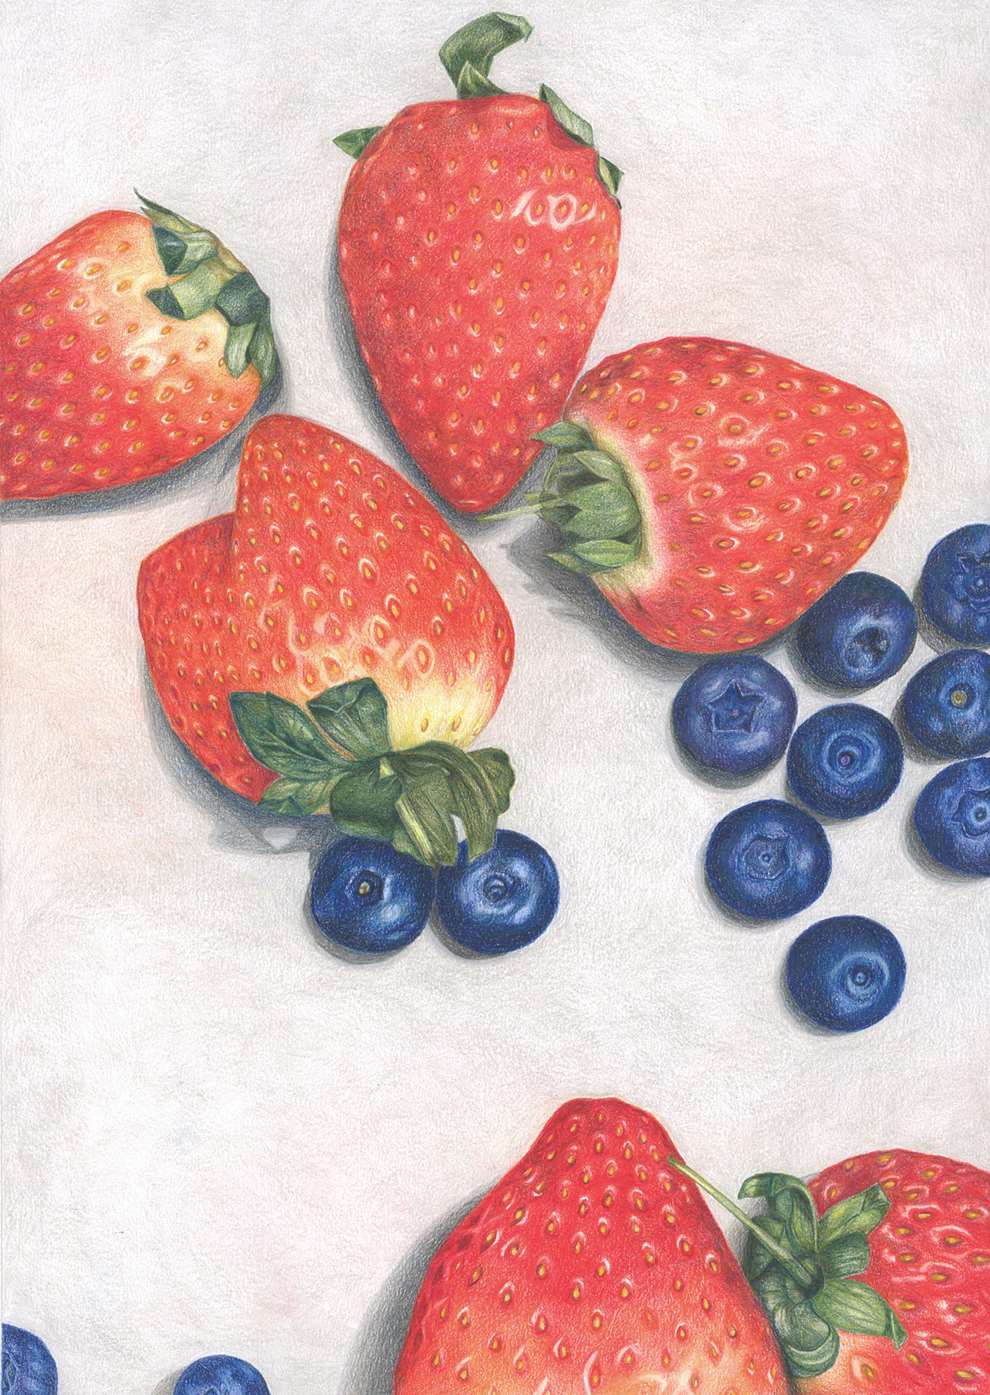 Pencil on Paper, Hand-drawn illustration of fruit detailed with colouring pencils.